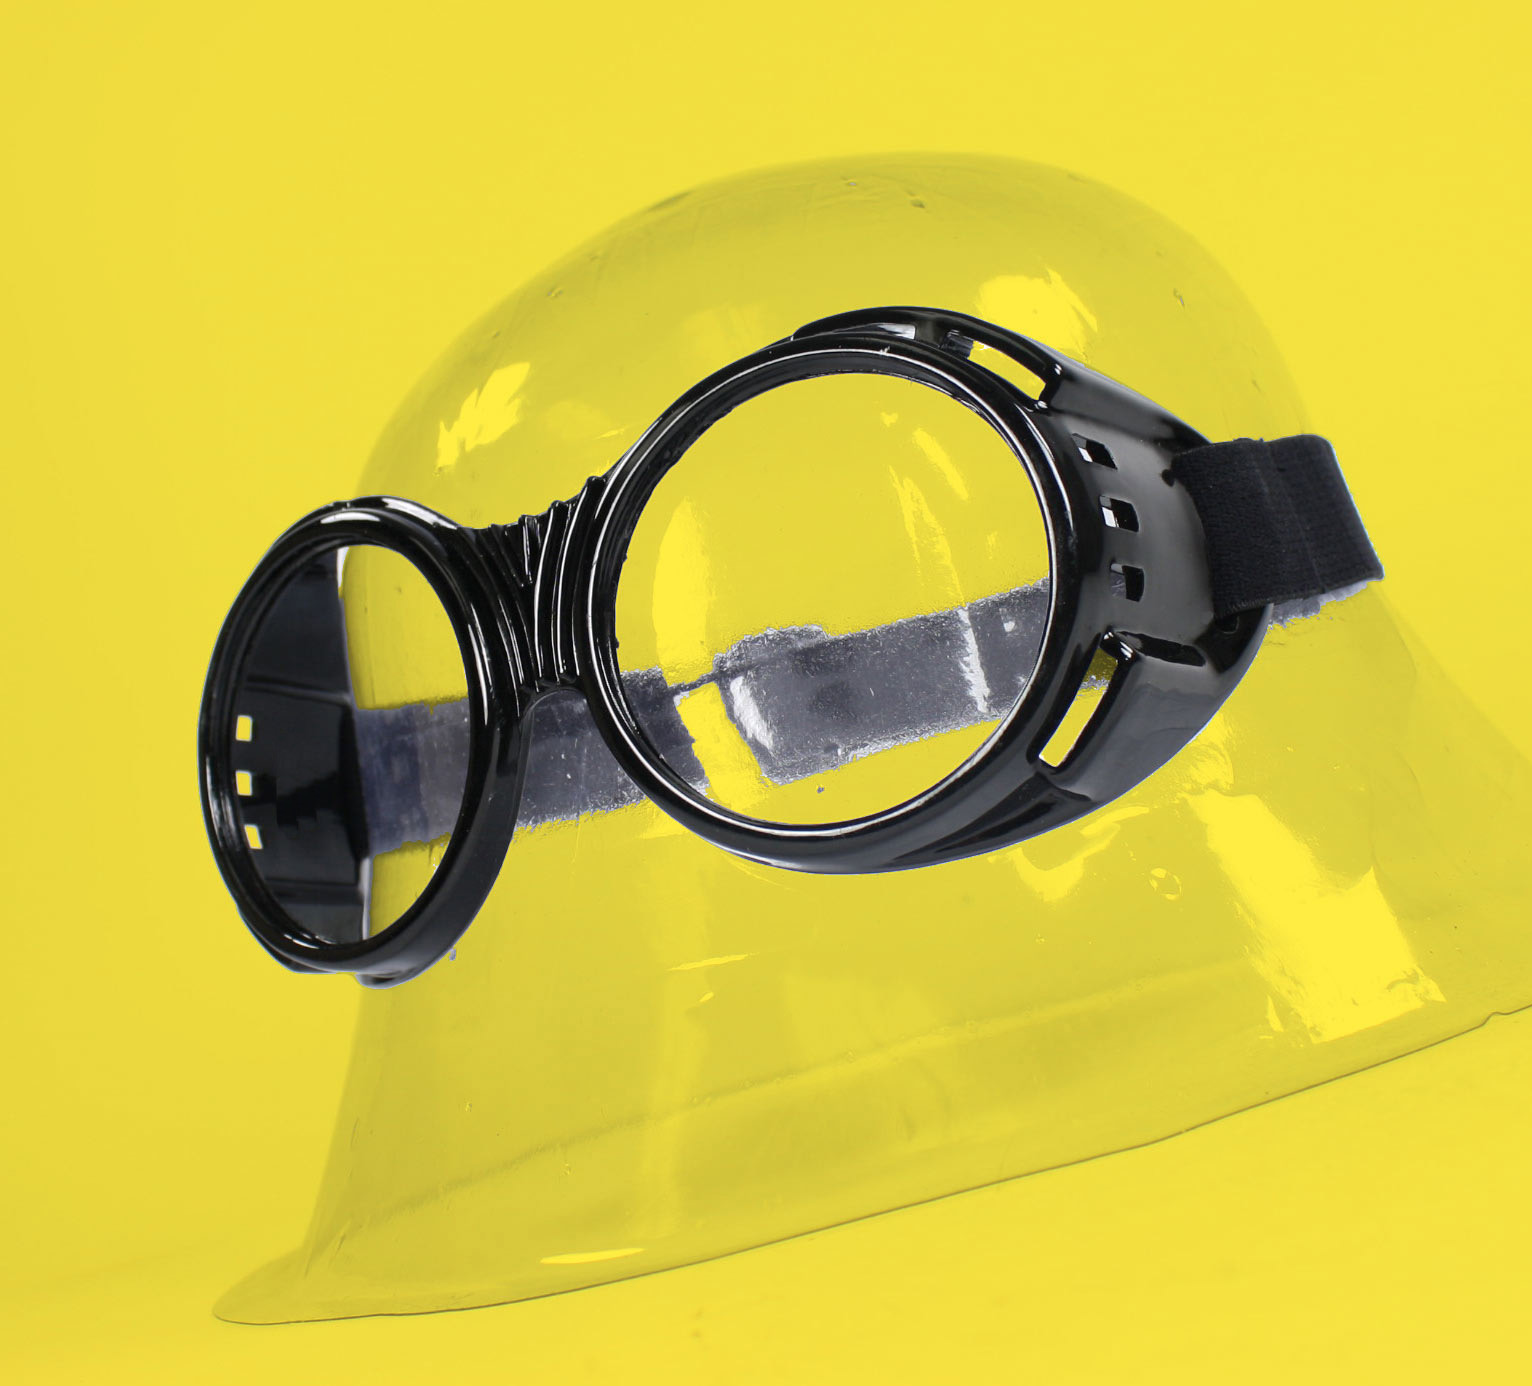 minion goggles for adults